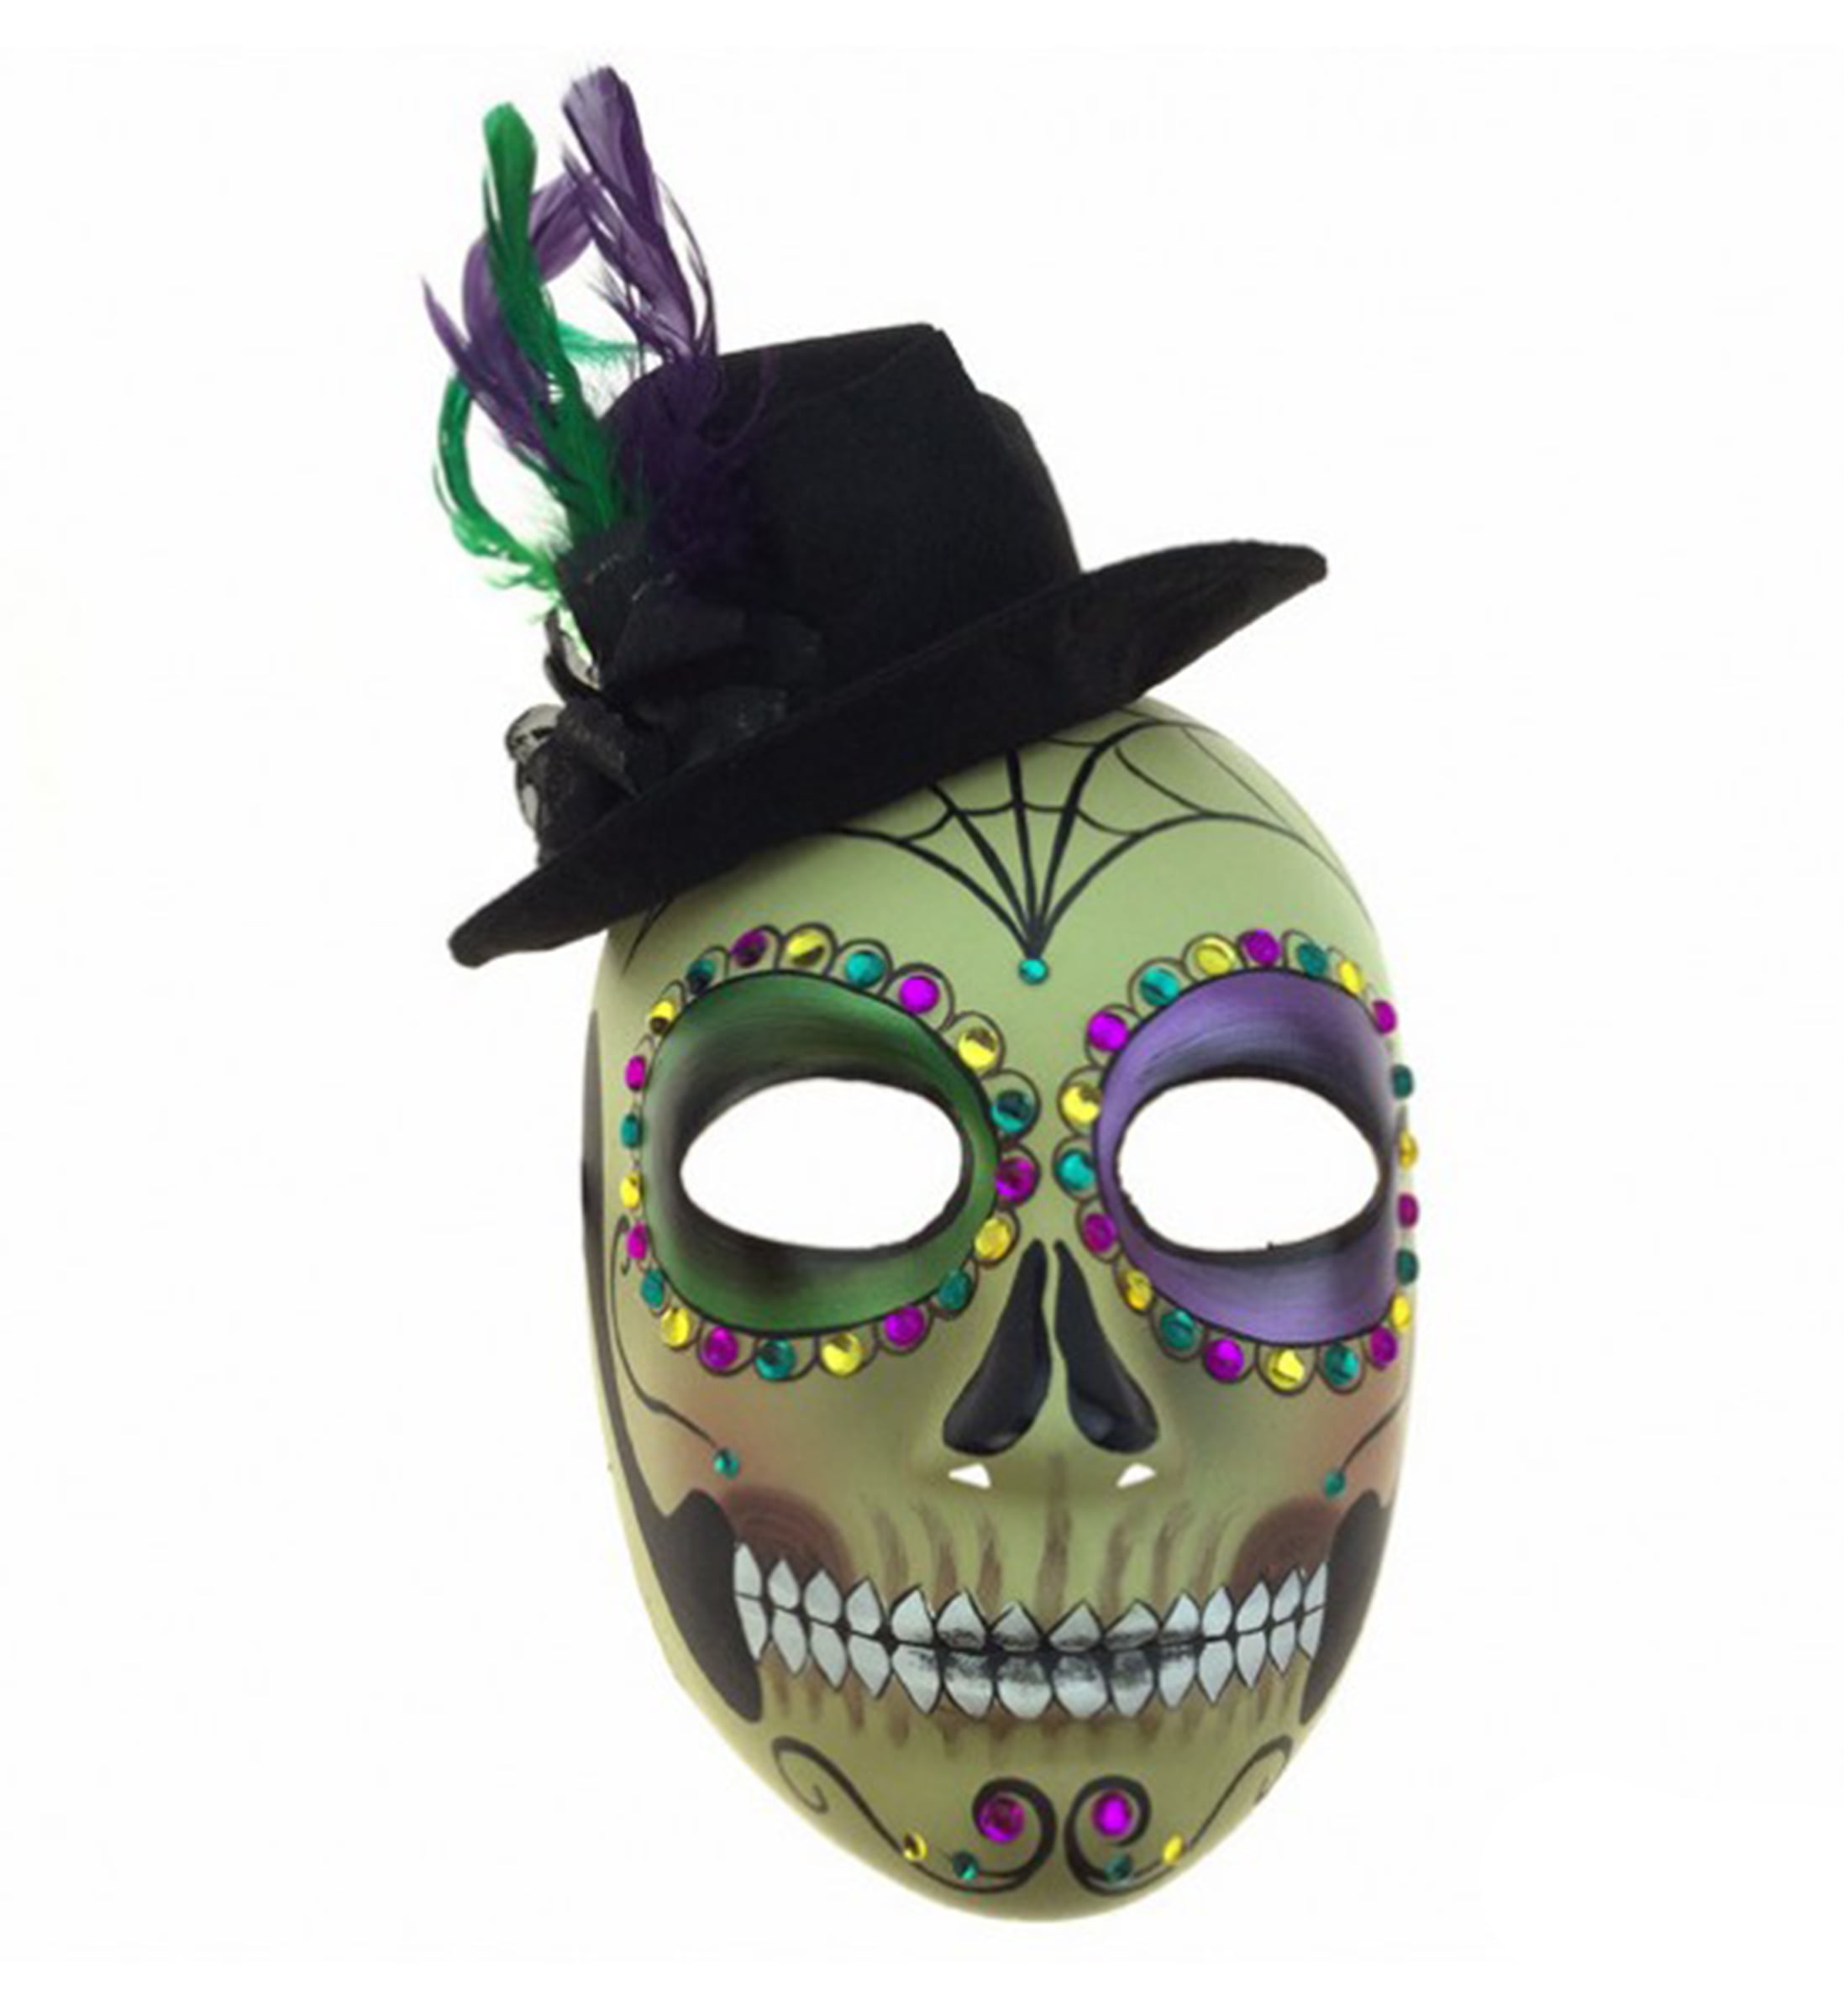 Mens Day Of The Dead Mexican Sugar Skull Halloween Mask Zombie Costume Black 